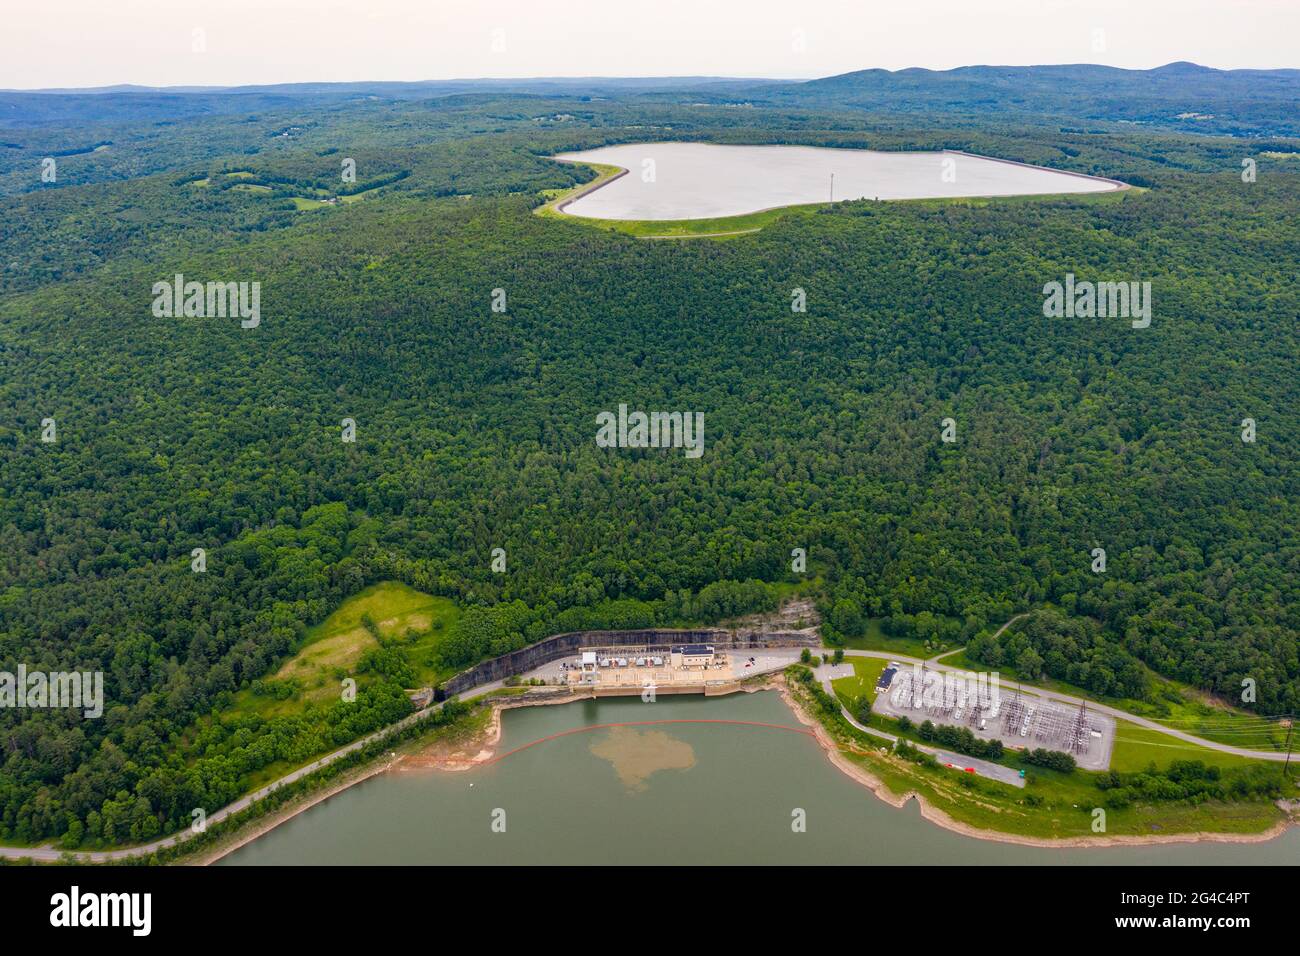 New York Power Authority Bienheim-Gilboa Pumped Storage Power Project is pictured in North Blenheim, NY Stock Photo